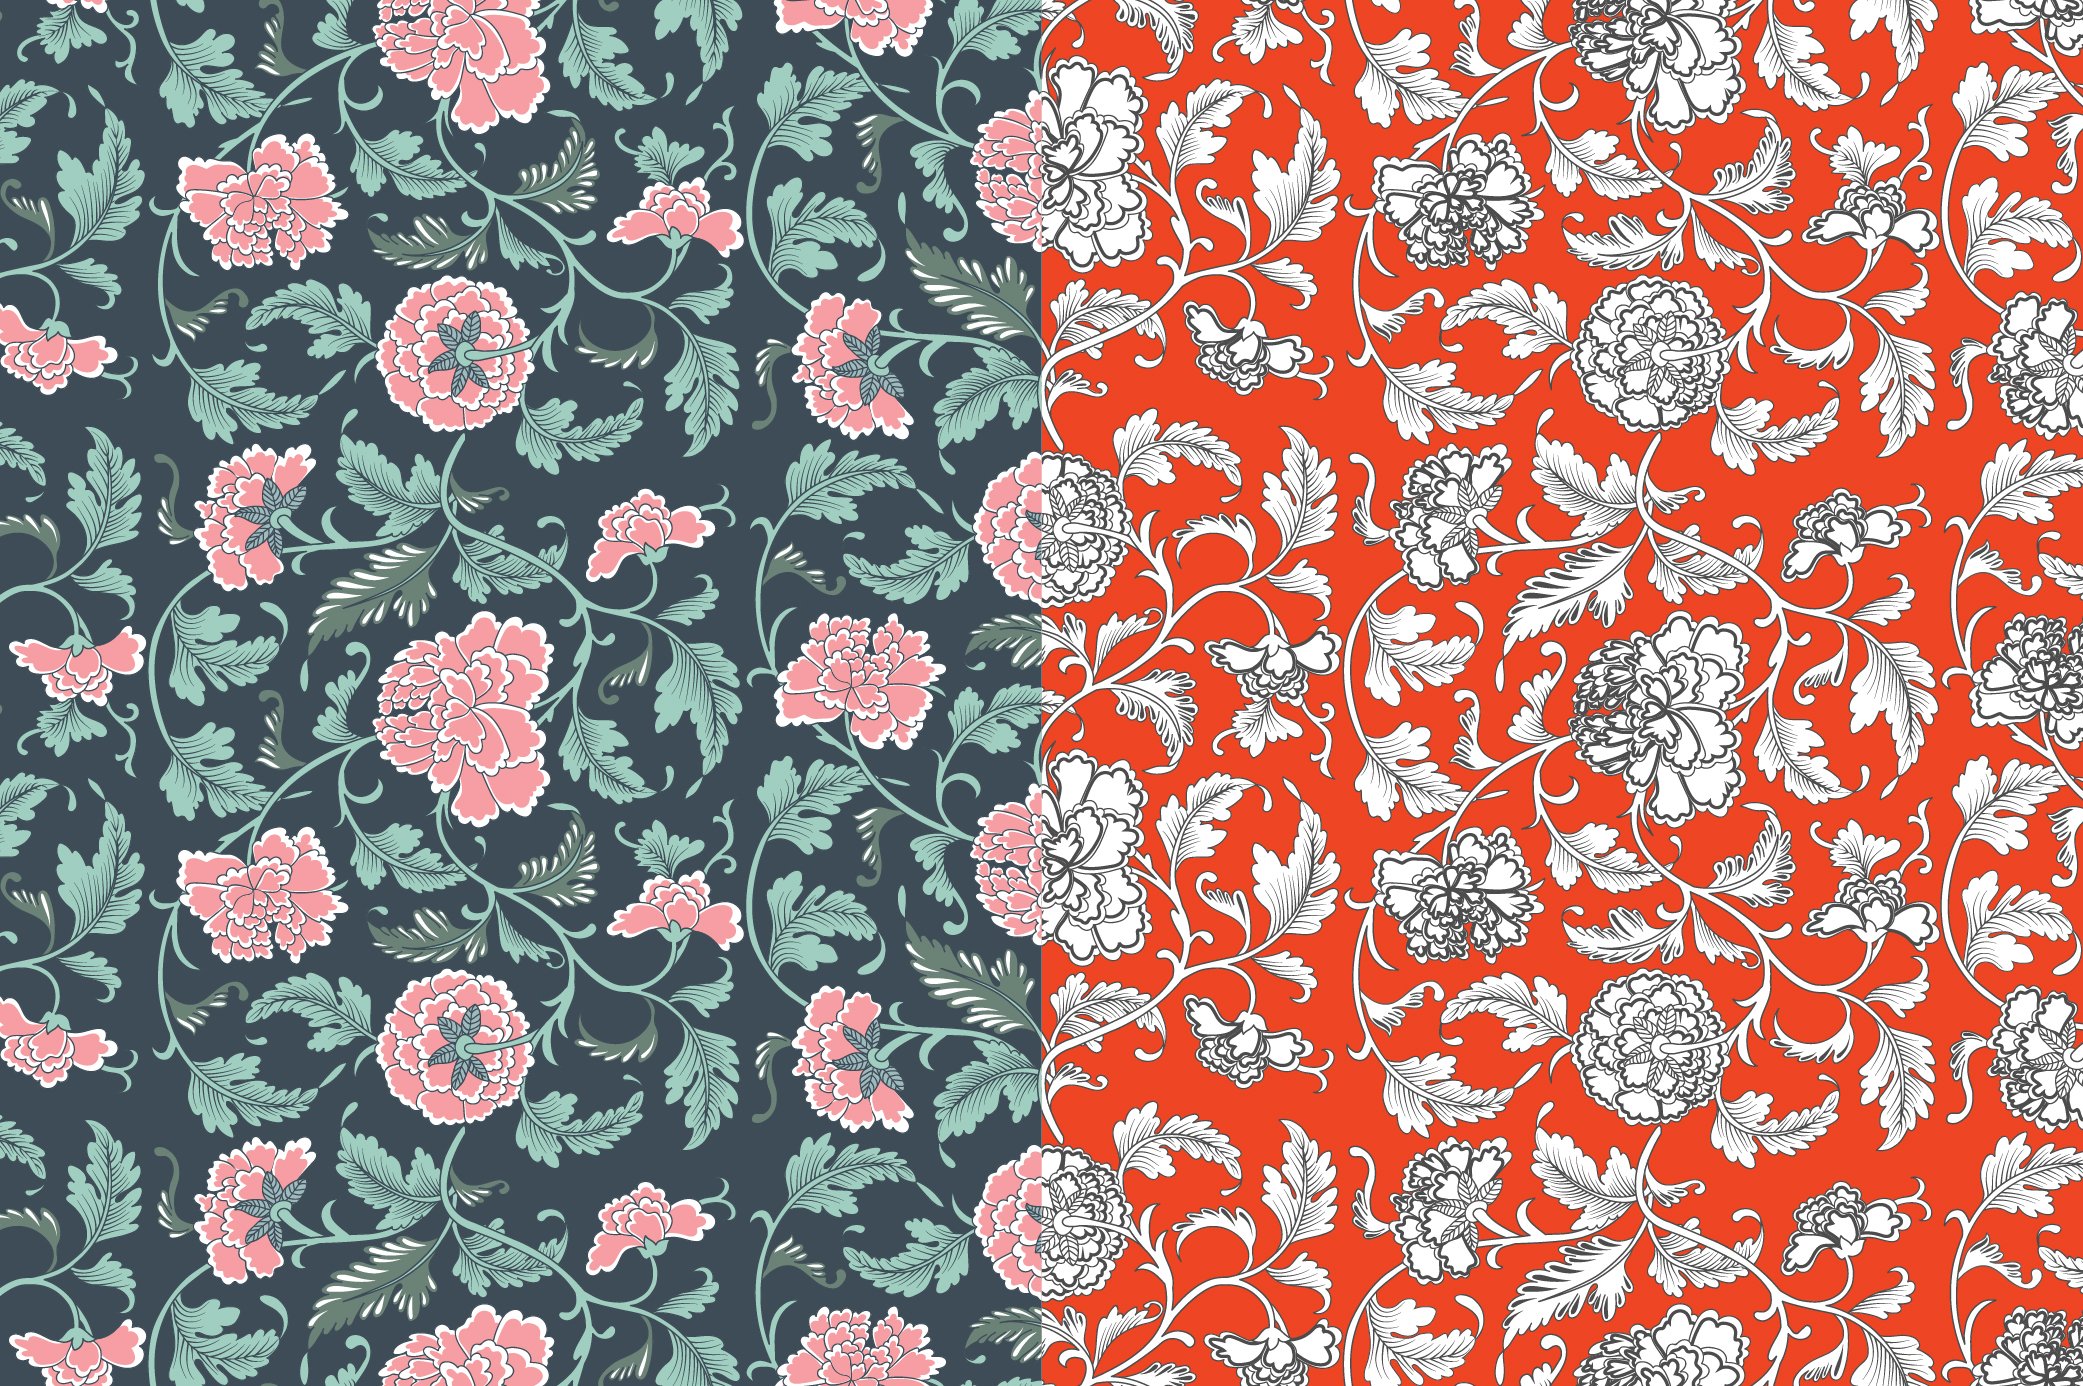 Two different patterns of flowers and leaves.